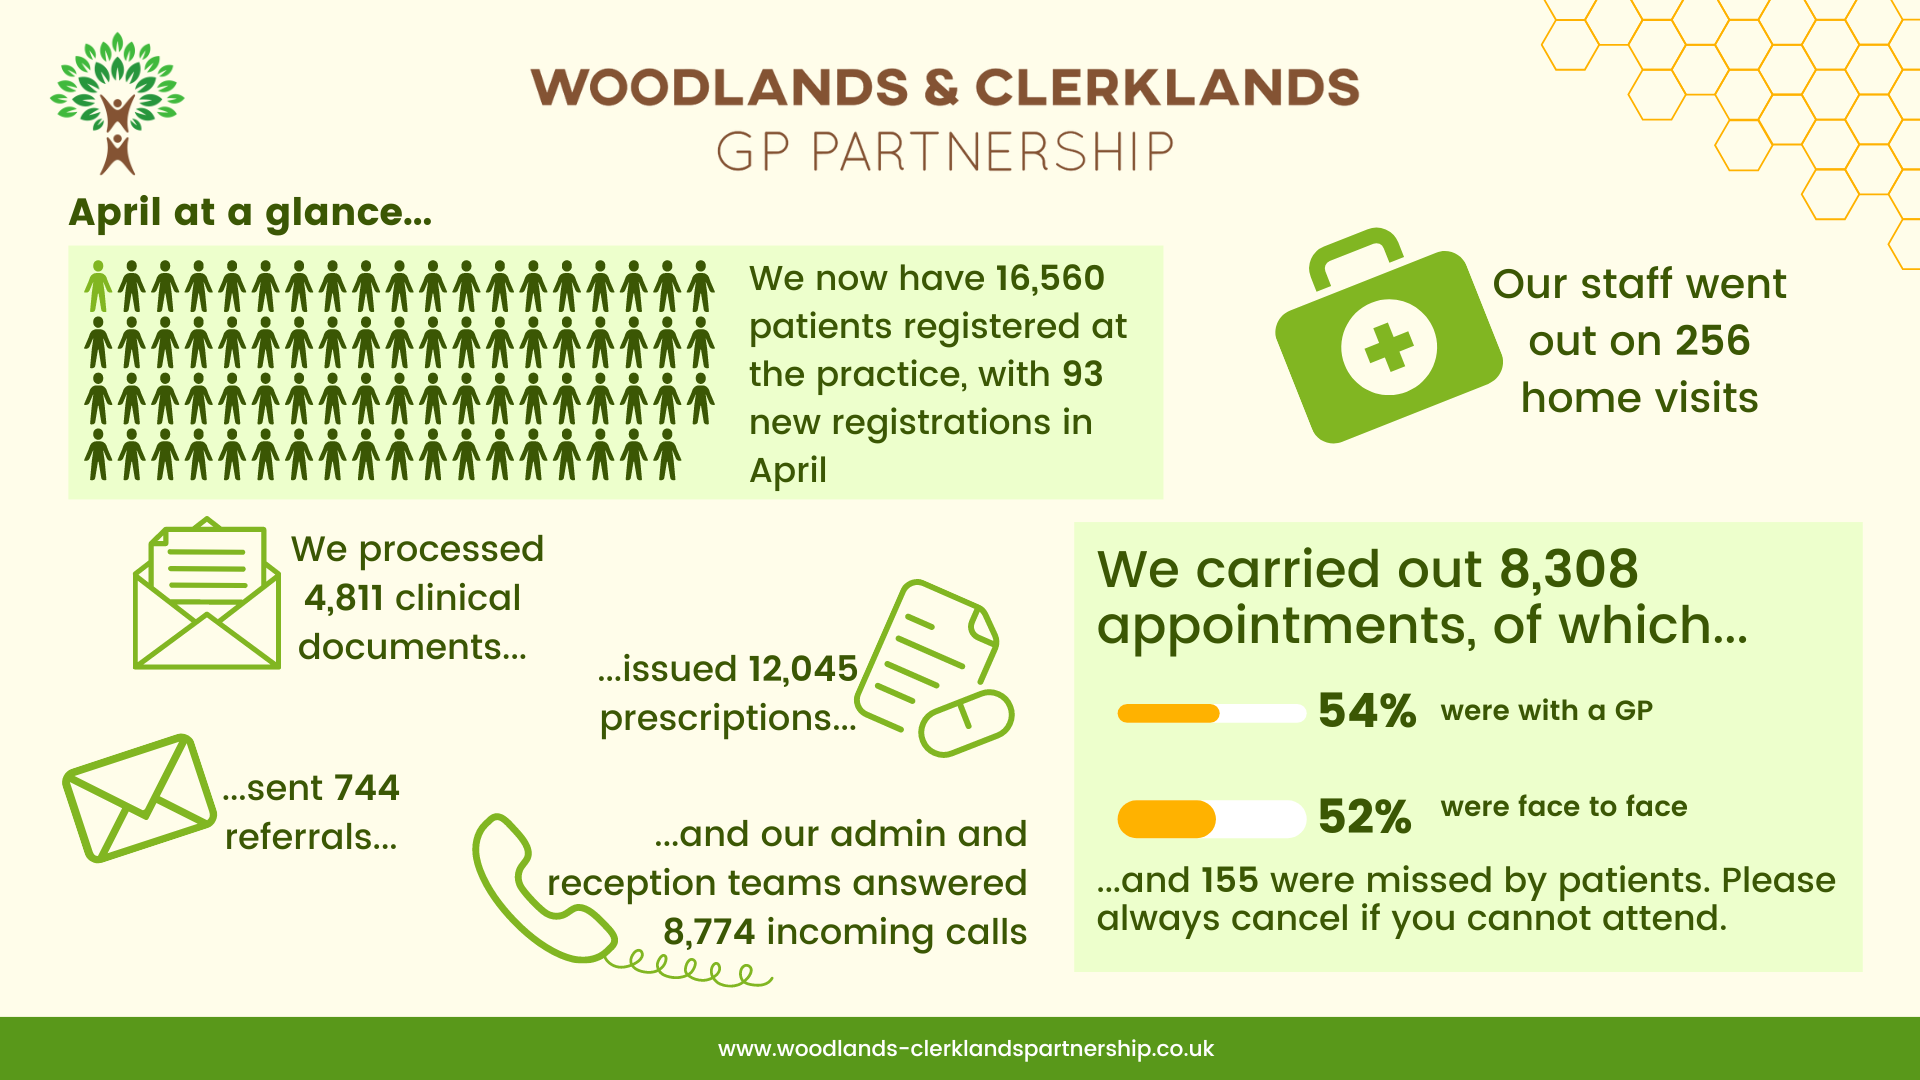 An infographic showing key stats about the practice in April.